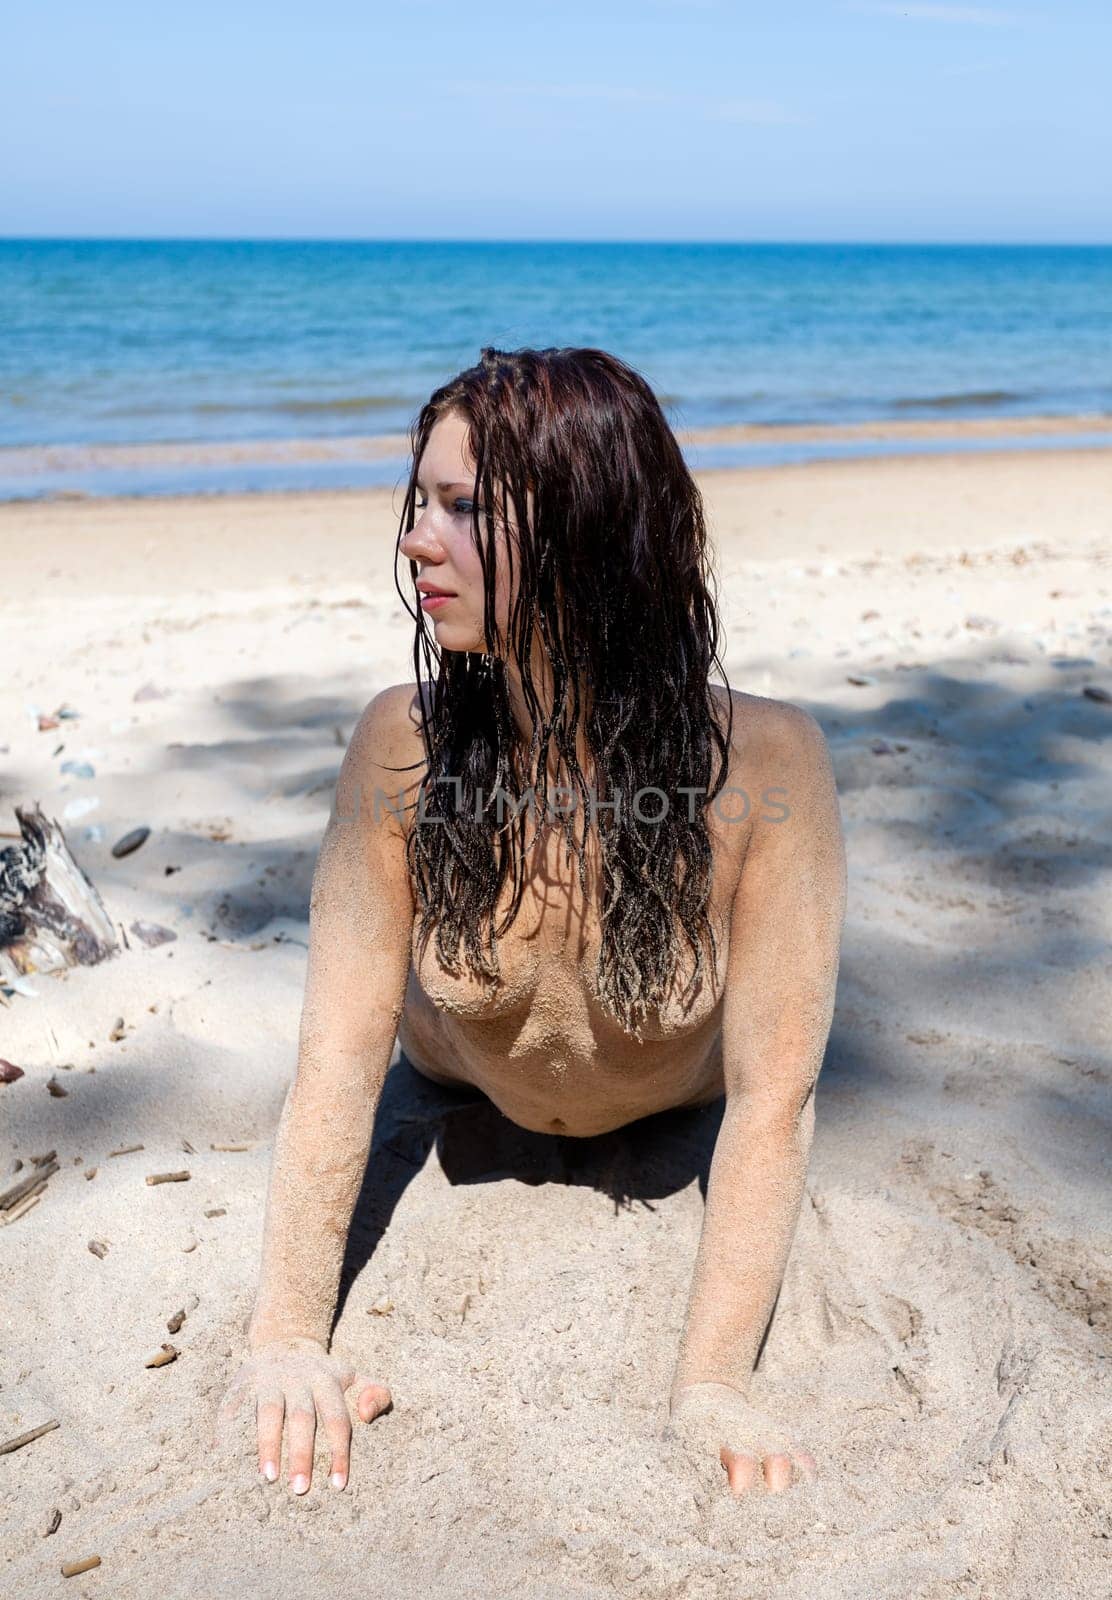 Nude woman with body covered by sand on sea coast by palinchak